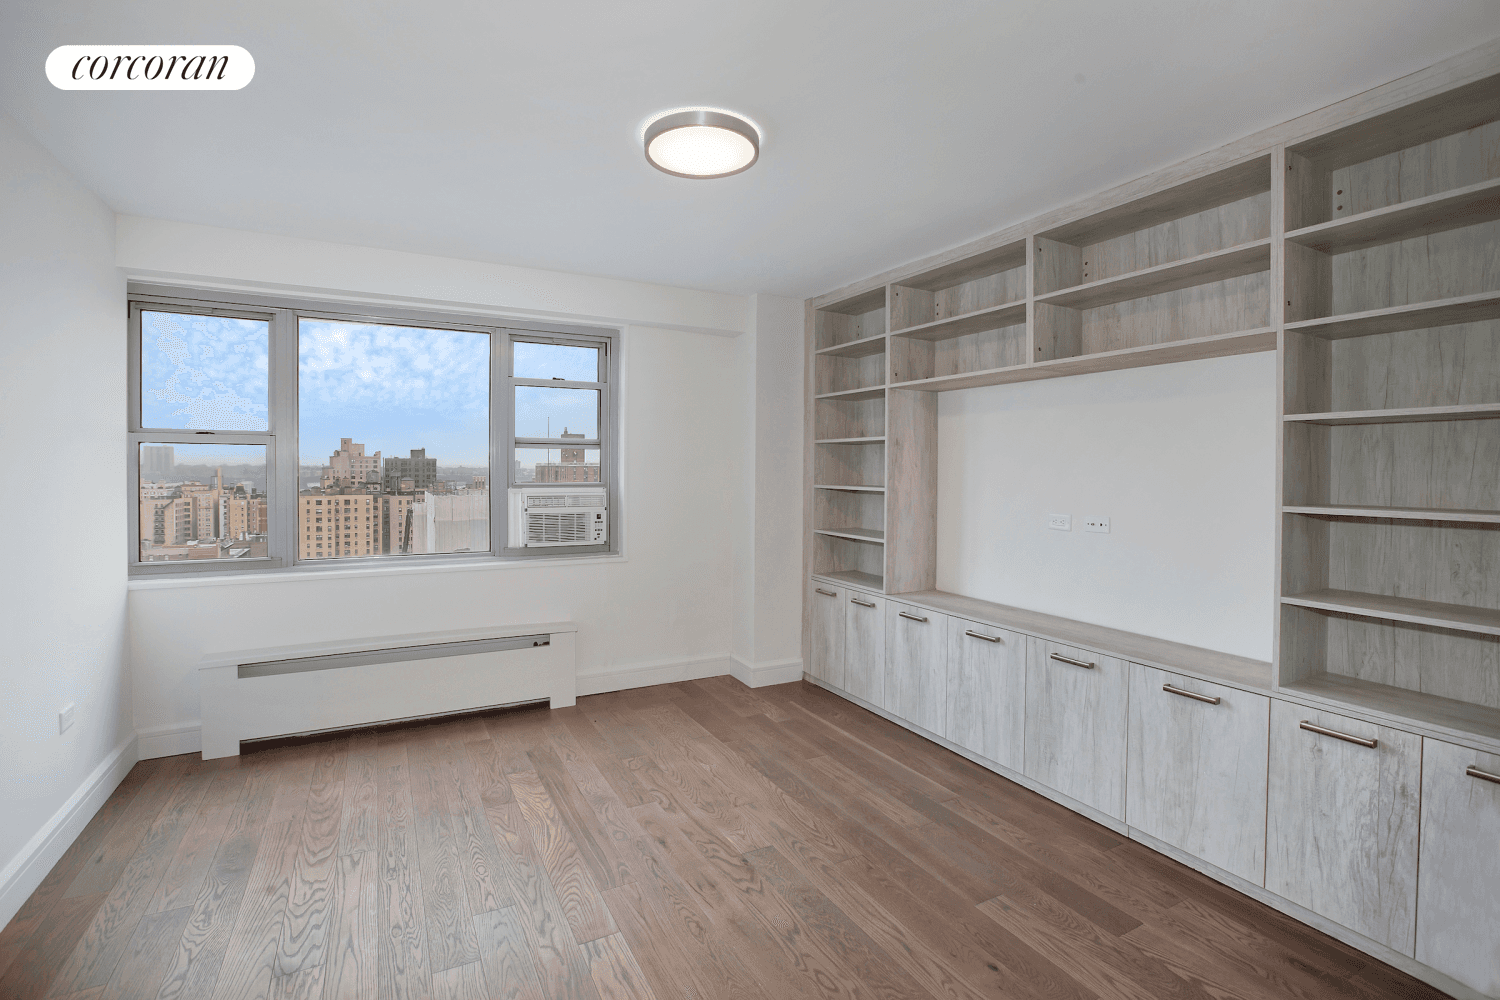 Enjoy open western views and sunsets from every room in this 1 bedroom located at 100 West 93rd Street.